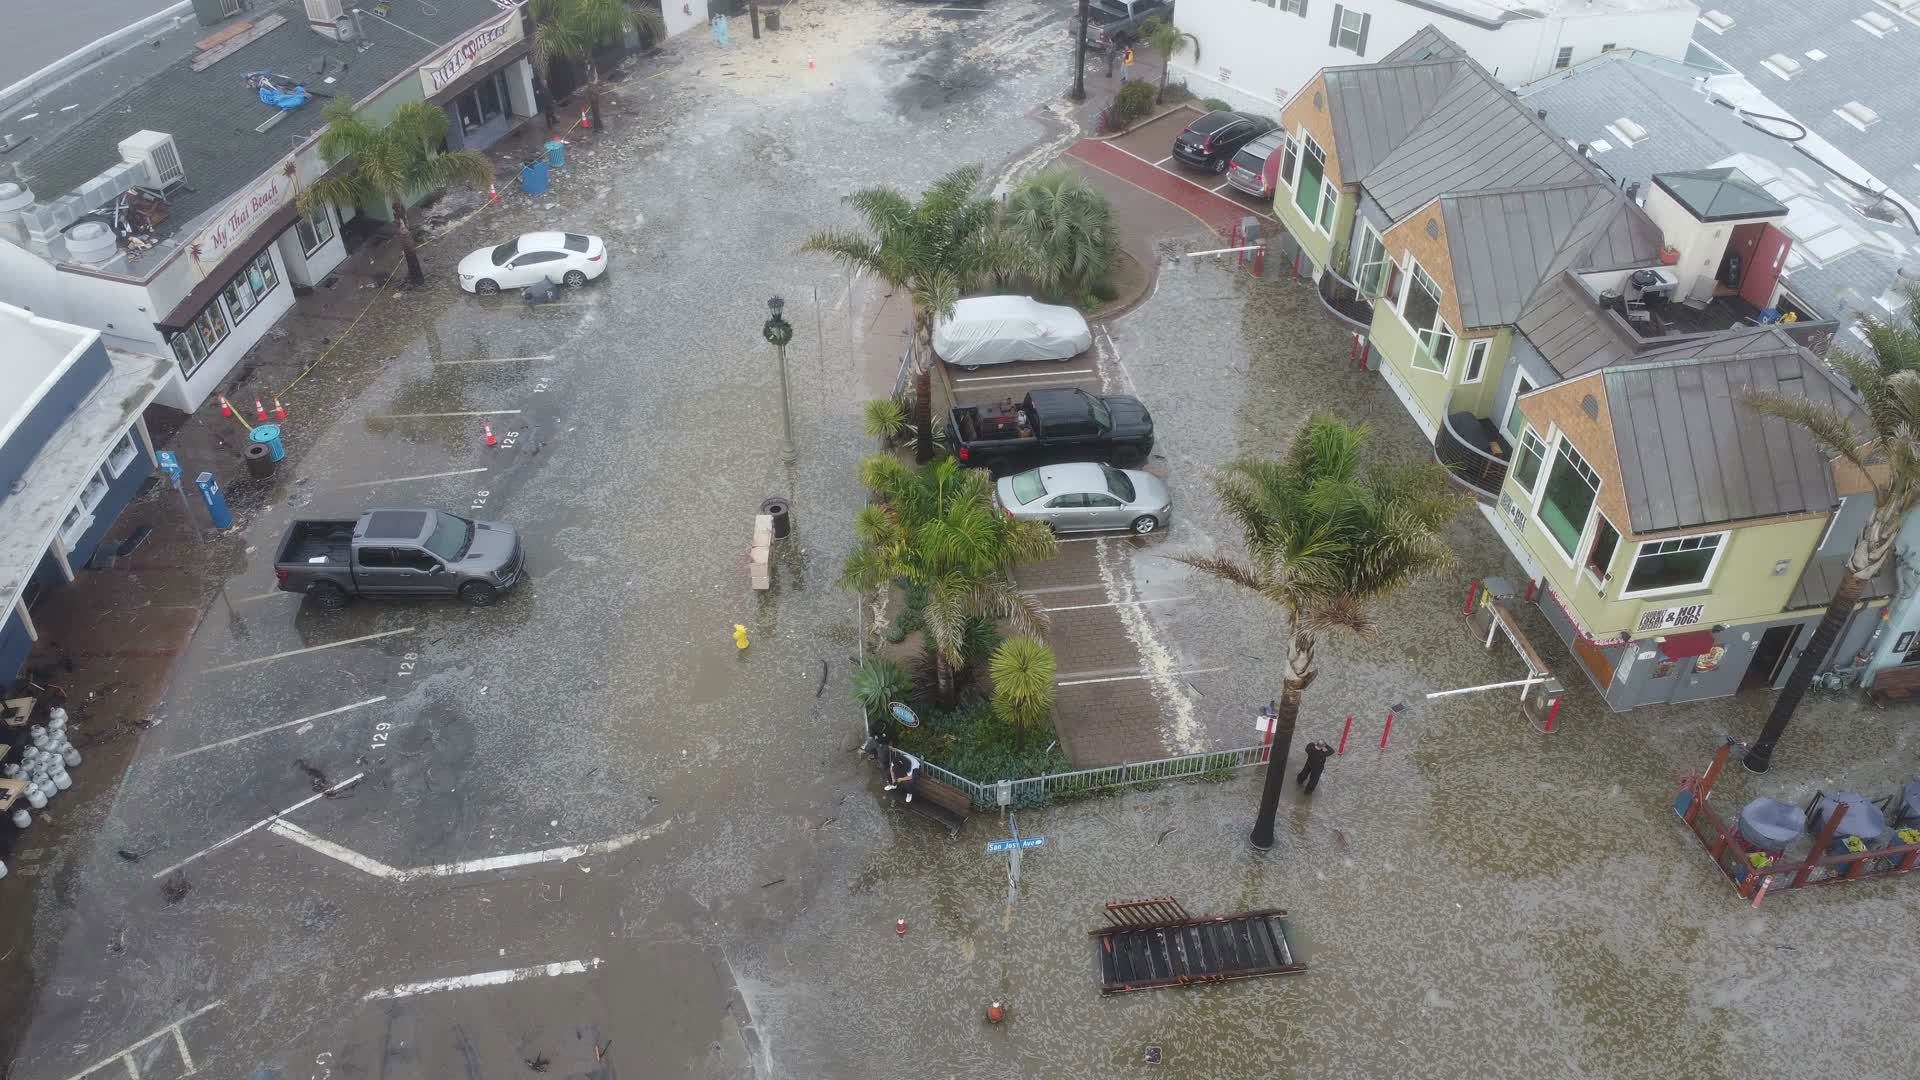 Capitola Flooding Drone video shows damage caused by high surf